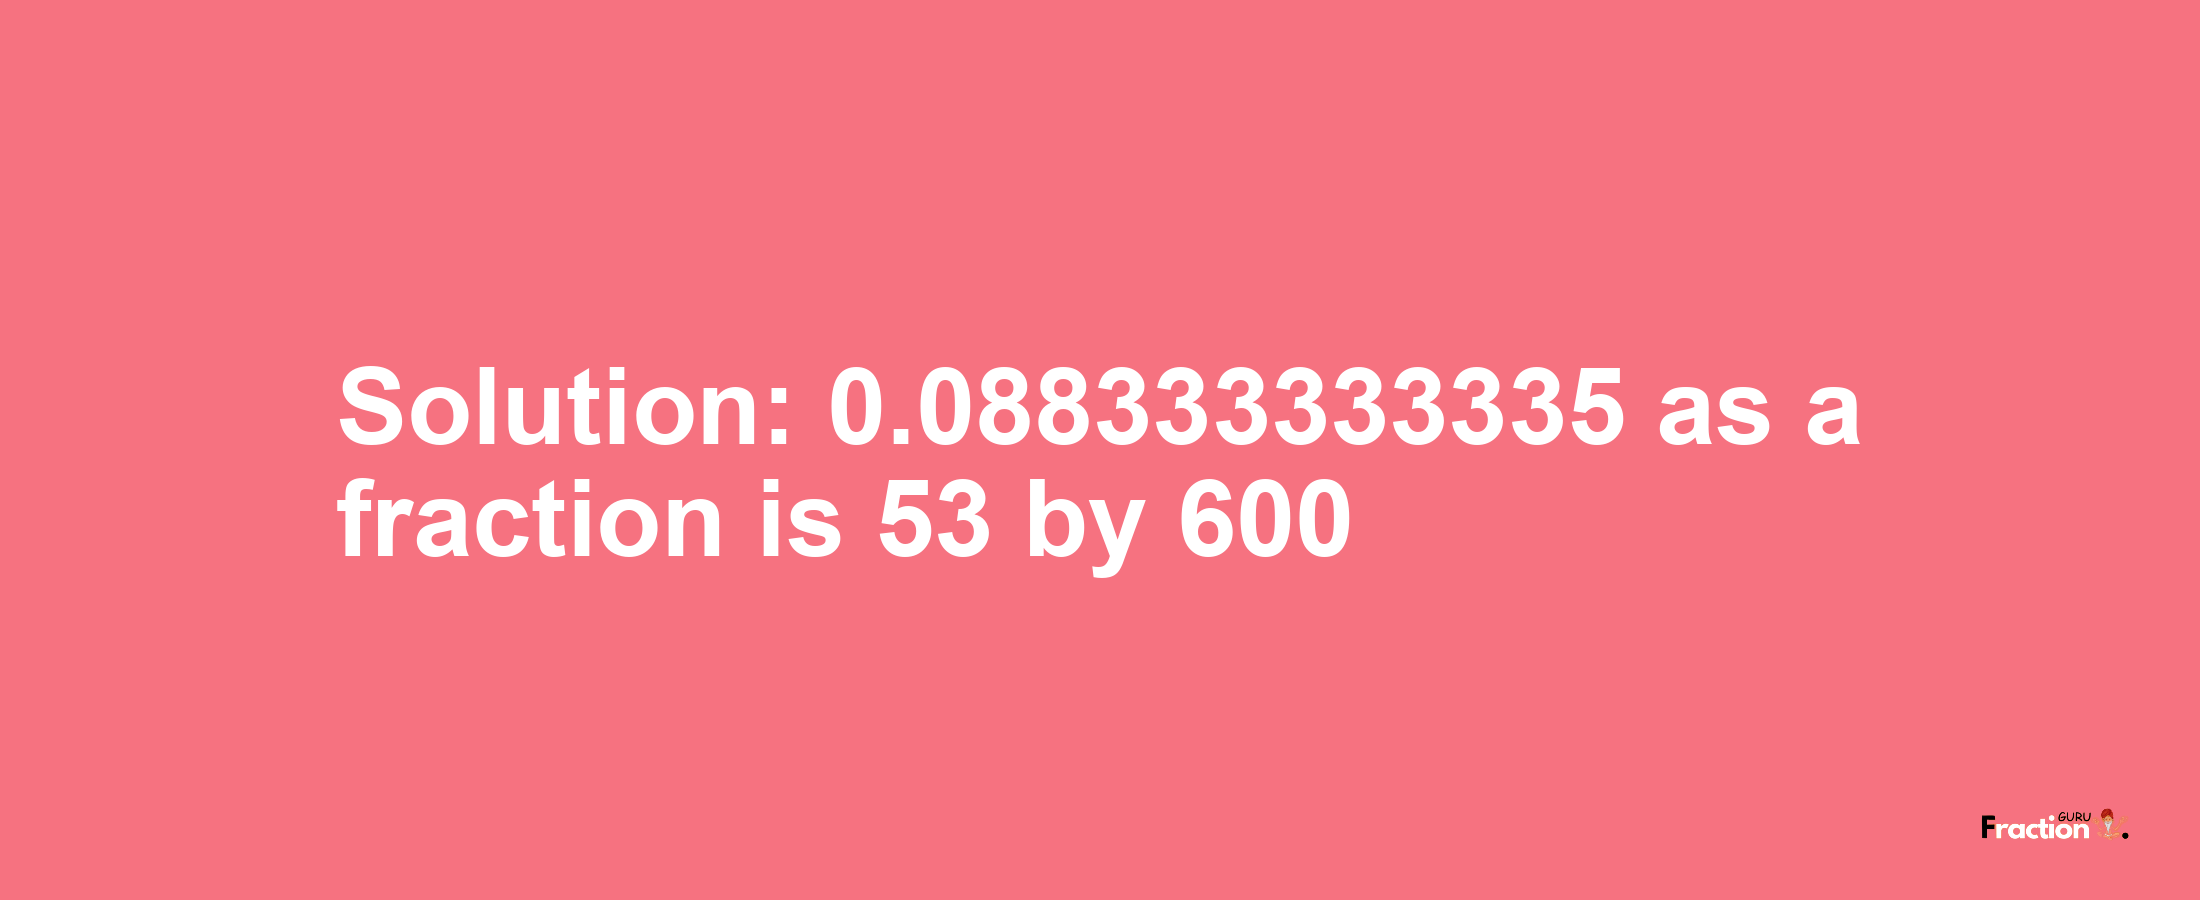 Solution:0.088333333335 as a fraction is 53/600